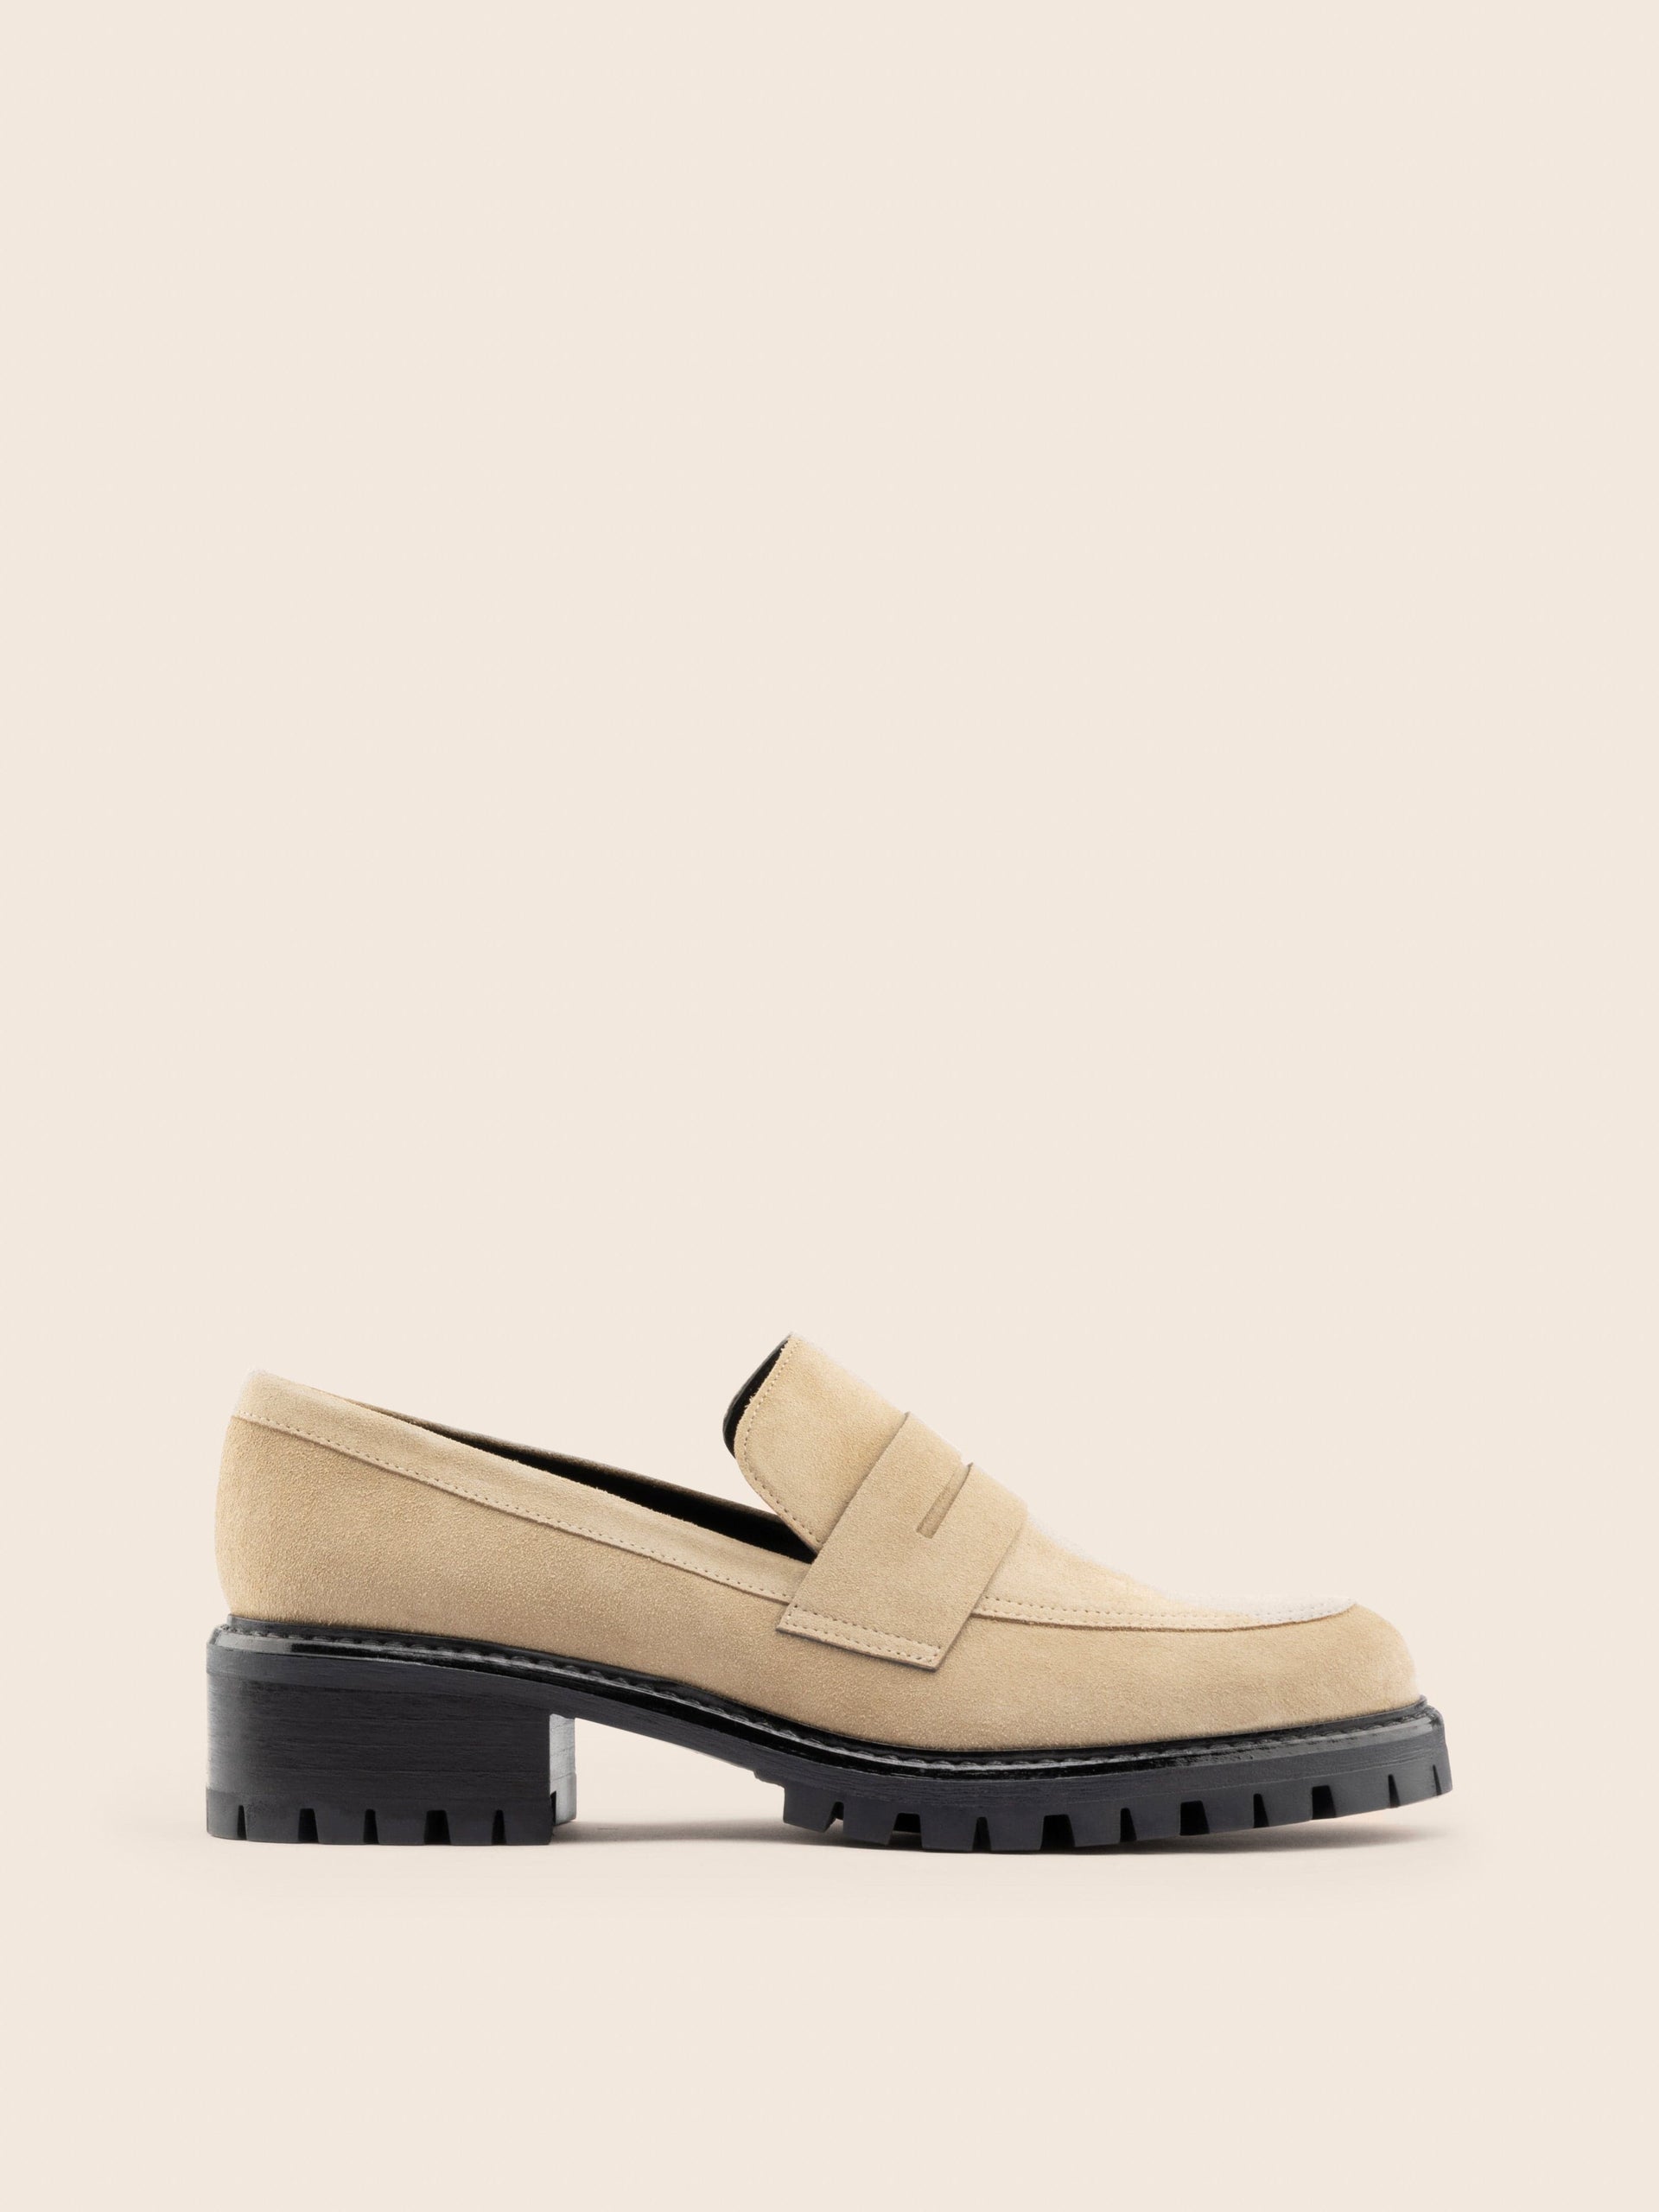 Seconde main Sintra Loafer Sand